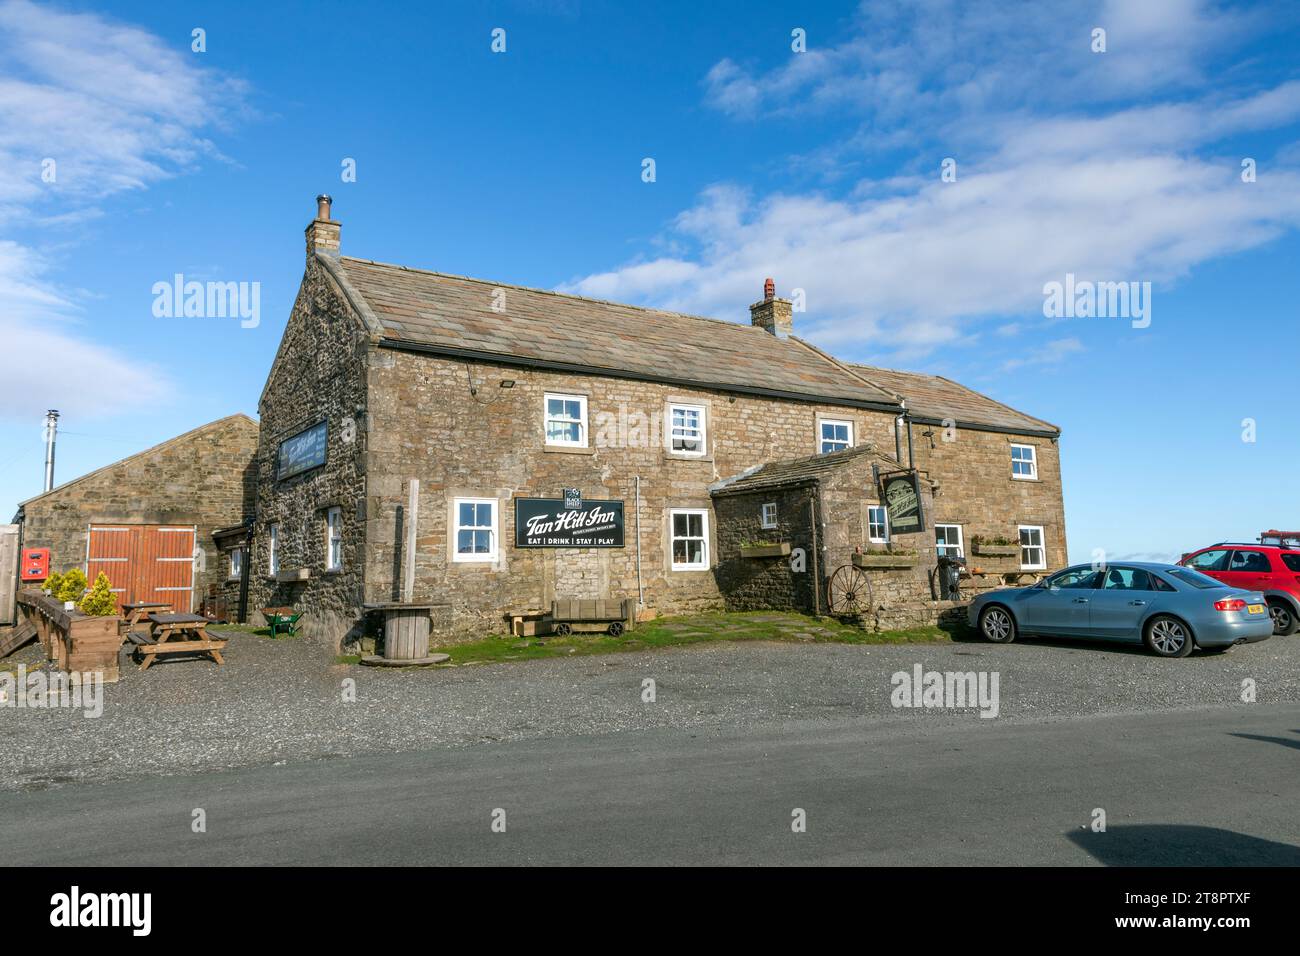 The Tan Hill Inn is a public house at Tan Hill, North Yorkshire. It is the highest inn in the British Isles at 1,732 feet (528 m) above sea level. Stock Photo